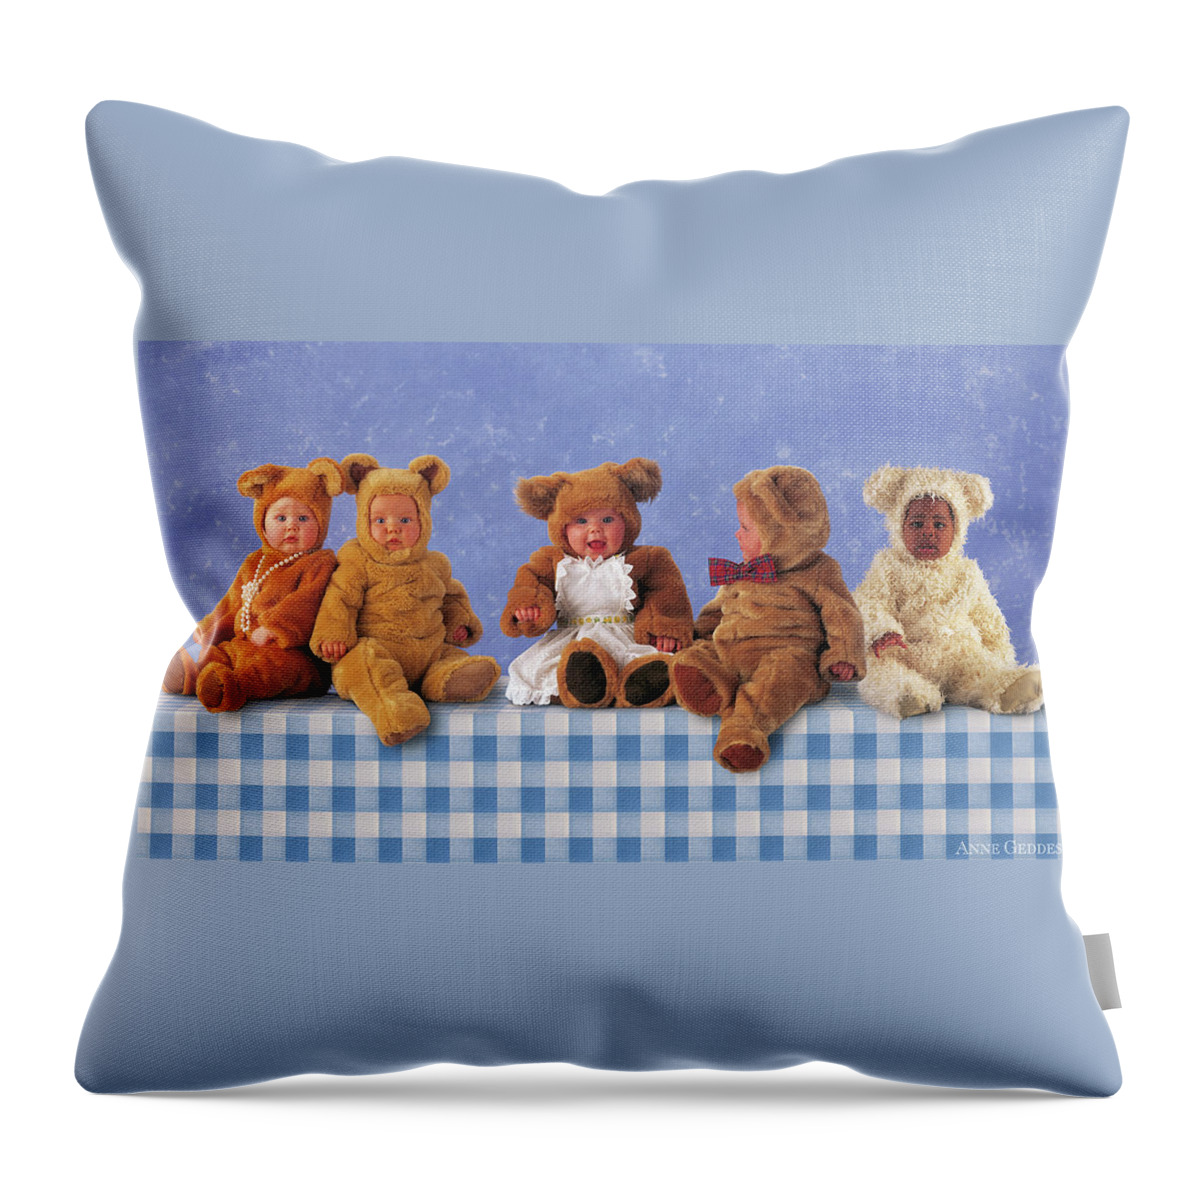 Picnic Throw Pillow featuring the photograph Teddy Bears Picnic by Anne Geddes